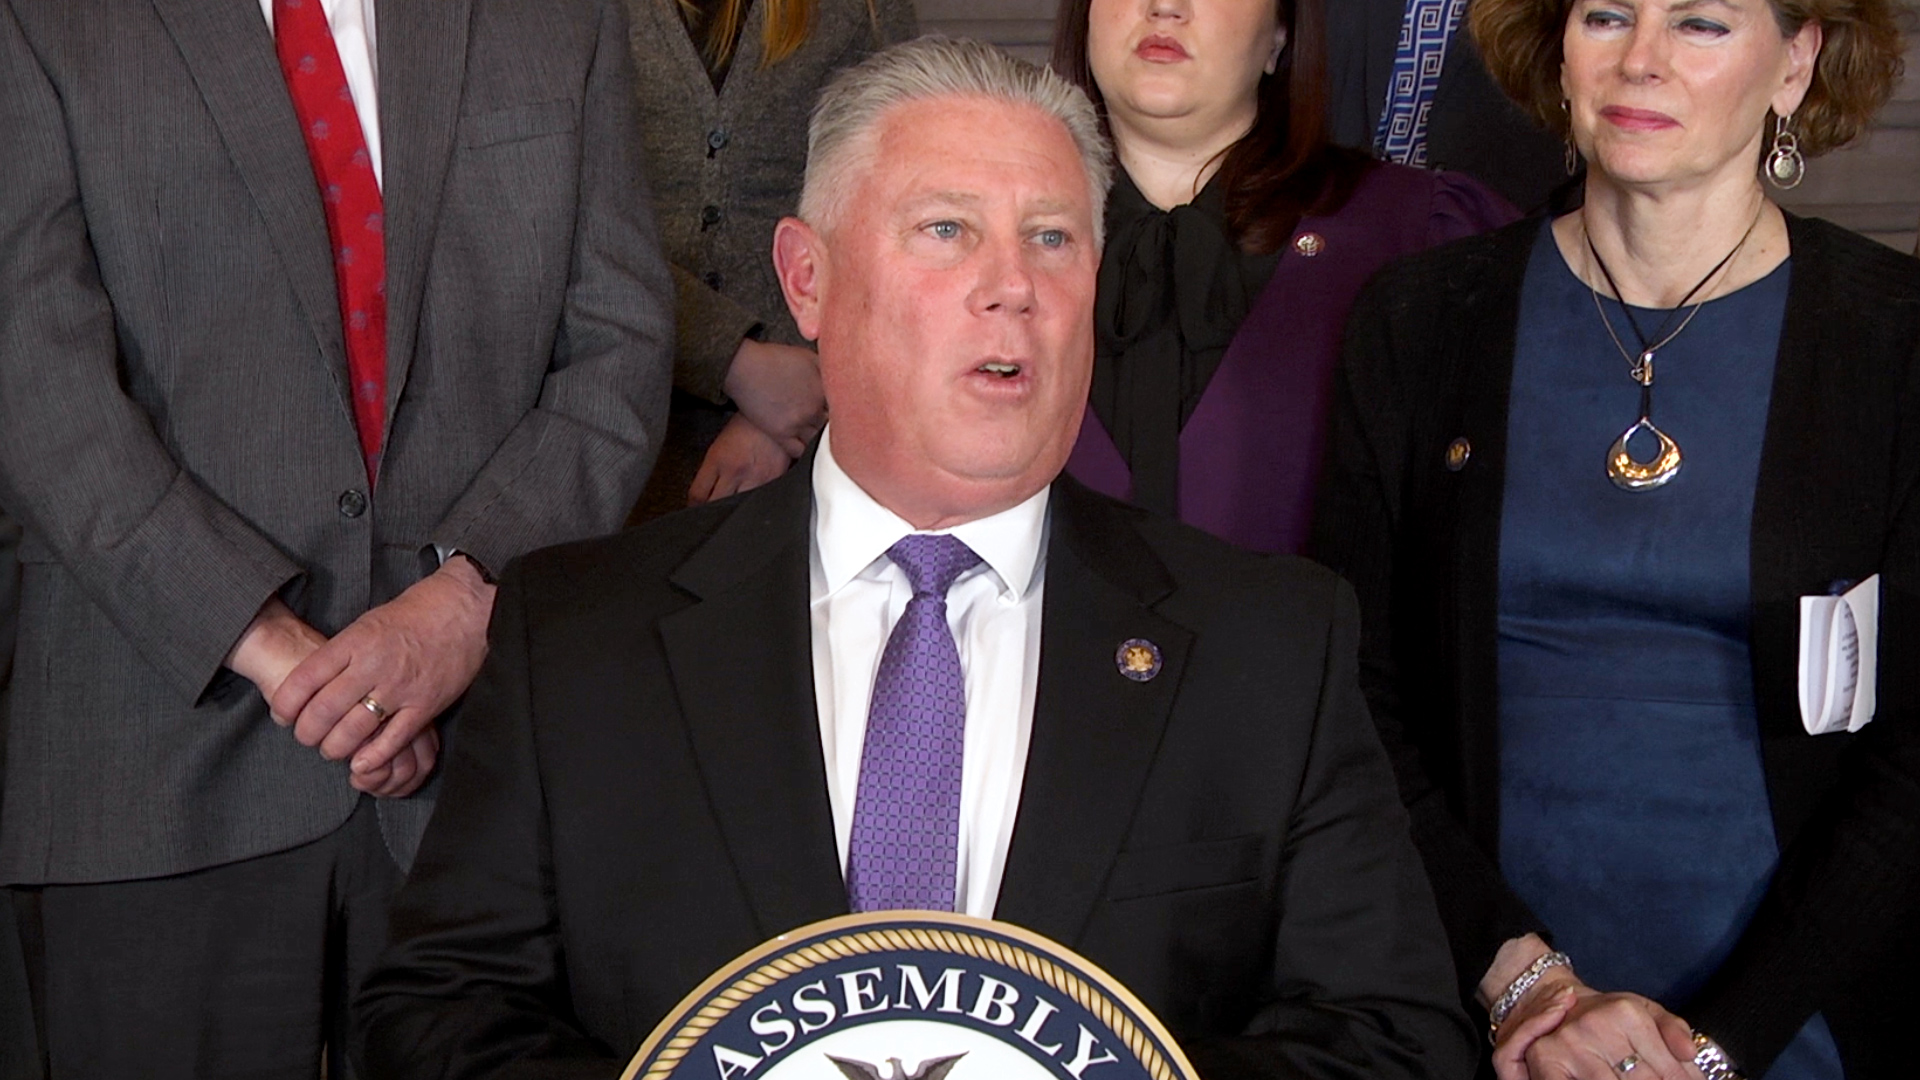 McDonald Speaks Out on Critical Need for an Increase in Reimbursement Rates for Nursing Homes